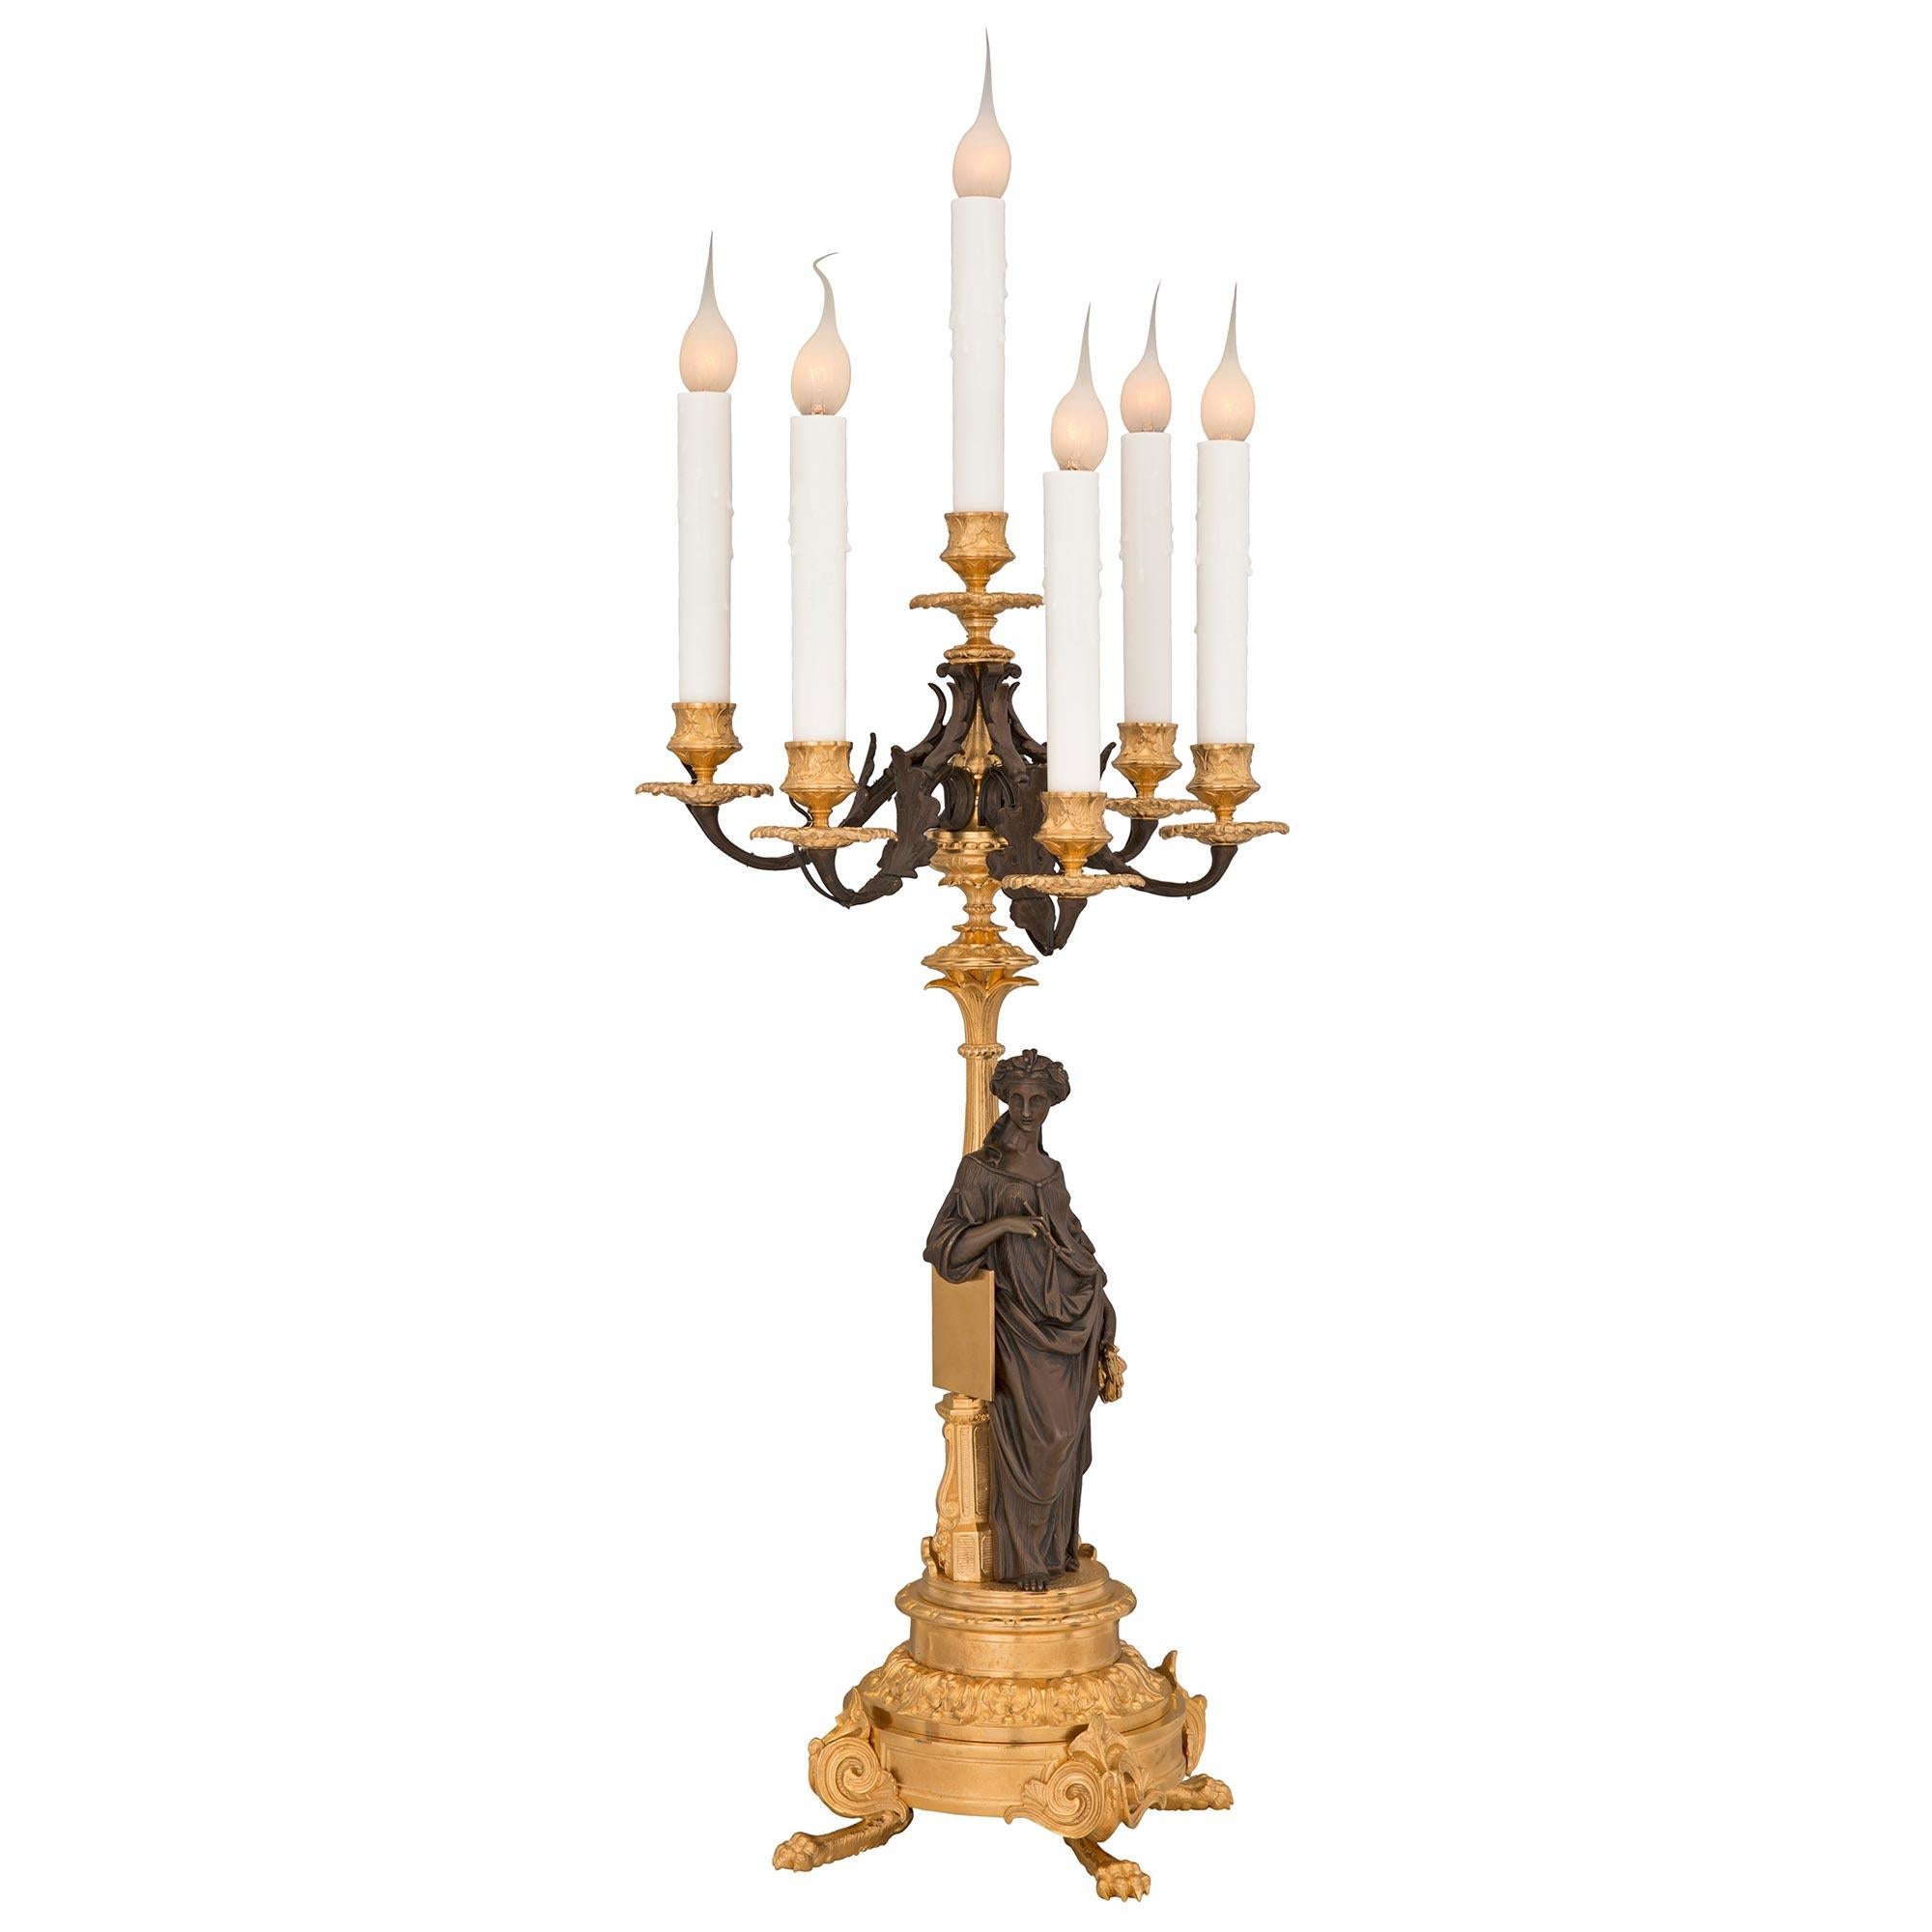 An impressive true pair of French 19th century Renaissance st. patinated bronze and ormolu candelabra lamps. Each six arm lamp is raised by handsome paw feet below scrolled foliate designs and a circular base with a wrap around acanthus leaf band.